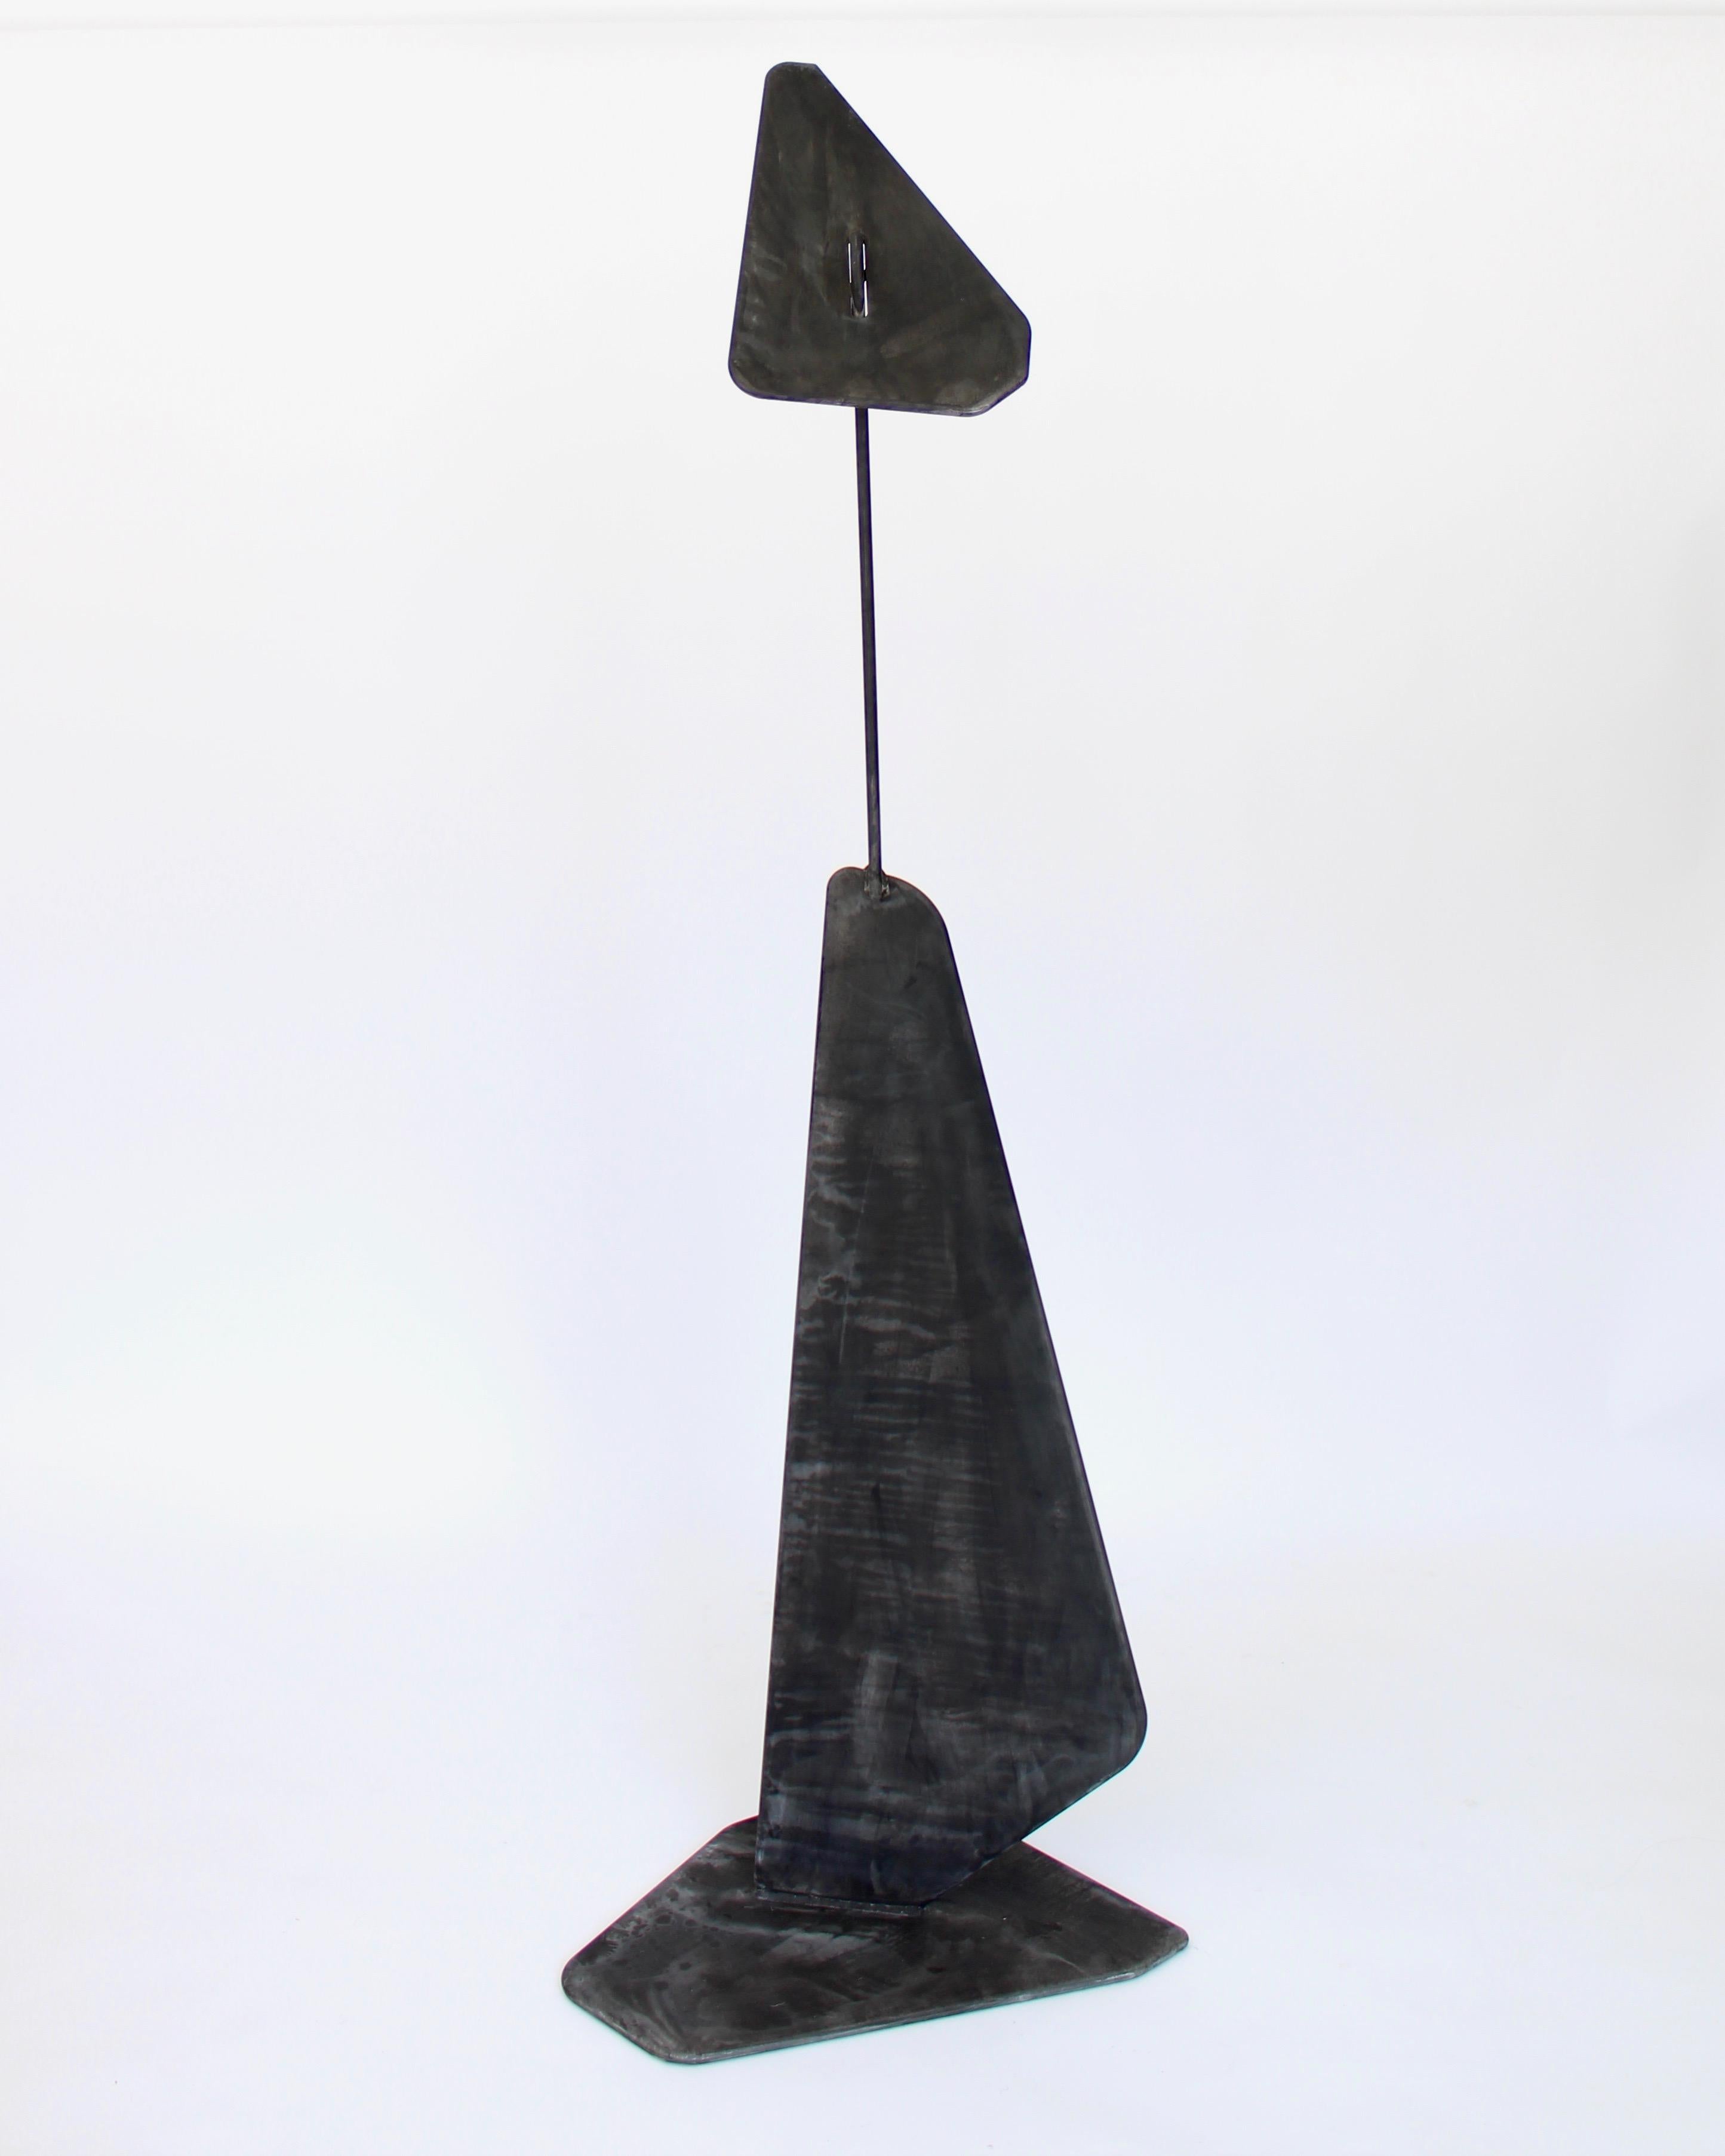 Artist Elliot Bergman patinated dark charcoal gray to black aluminum tall welded polygon sculpture. Composed of 4 faceted planes welded together to form a large standing sculpture which Bergman created in 2020 for Resonant Body exhibit at Shane